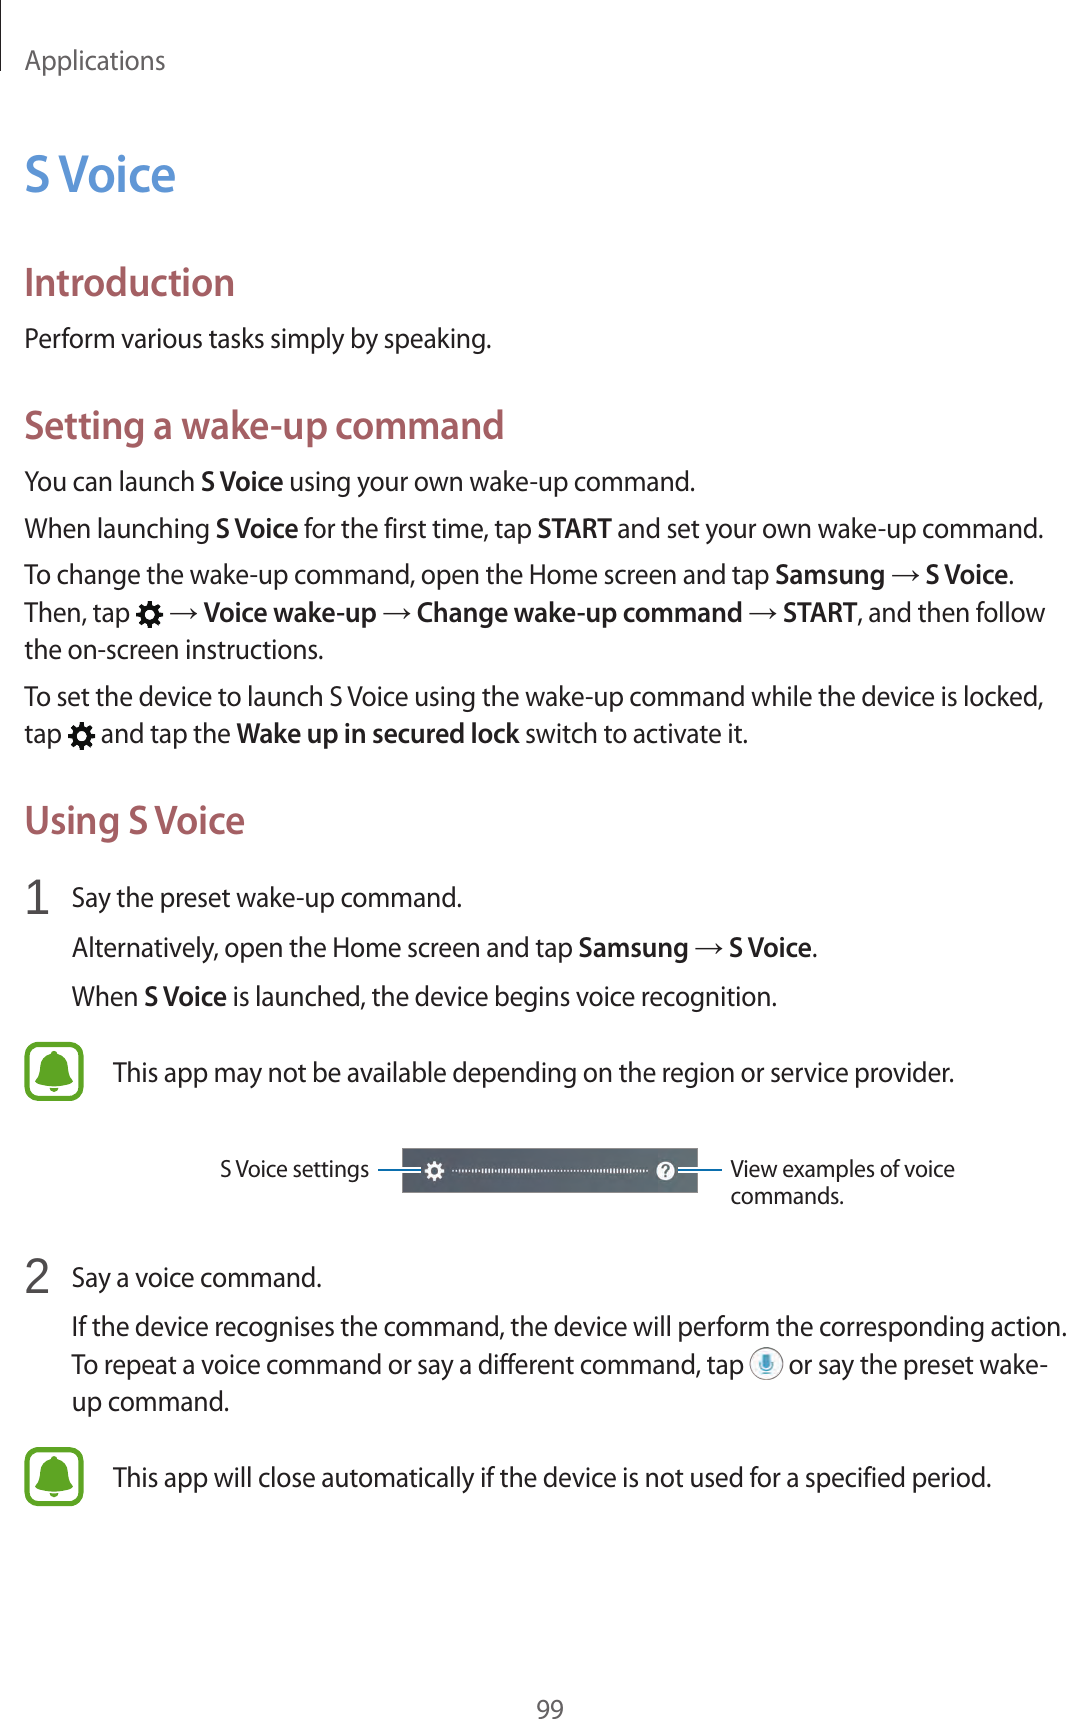 Applications99S VoiceIntroductionPerform various tasks simply by speaking.Setting a wake-up commandYou can launch S Voice using your own wake-up command.When launching S Voice for the first time, tap START and set your own wake-up command.To change the wake-up command, open the Home screen and tap Samsung → S Voice. Then, tap   → Voice wake-up → Change wake-up command → START, and then follow the on-screen instructions.To set the device to launch S Voice using the wake-up command while the device is locked, tap   and tap the Wake up in secured lock switch to activate it.Using S Voice1  Say the preset wake-up command.Alternatively, open the Home screen and tap Samsung → S Voice.When S Voice is launched, the device begins voice recognition.This app may not be available depending on the region or service provider.View examples of voice commands.S Voice settings2  Say a voice command.If the device recognises the command, the device will perform the corresponding action. To repeat a voice command or say a different command, tap   or say the preset wake-up command.This app will close automatically if the device is not used for a specified period.